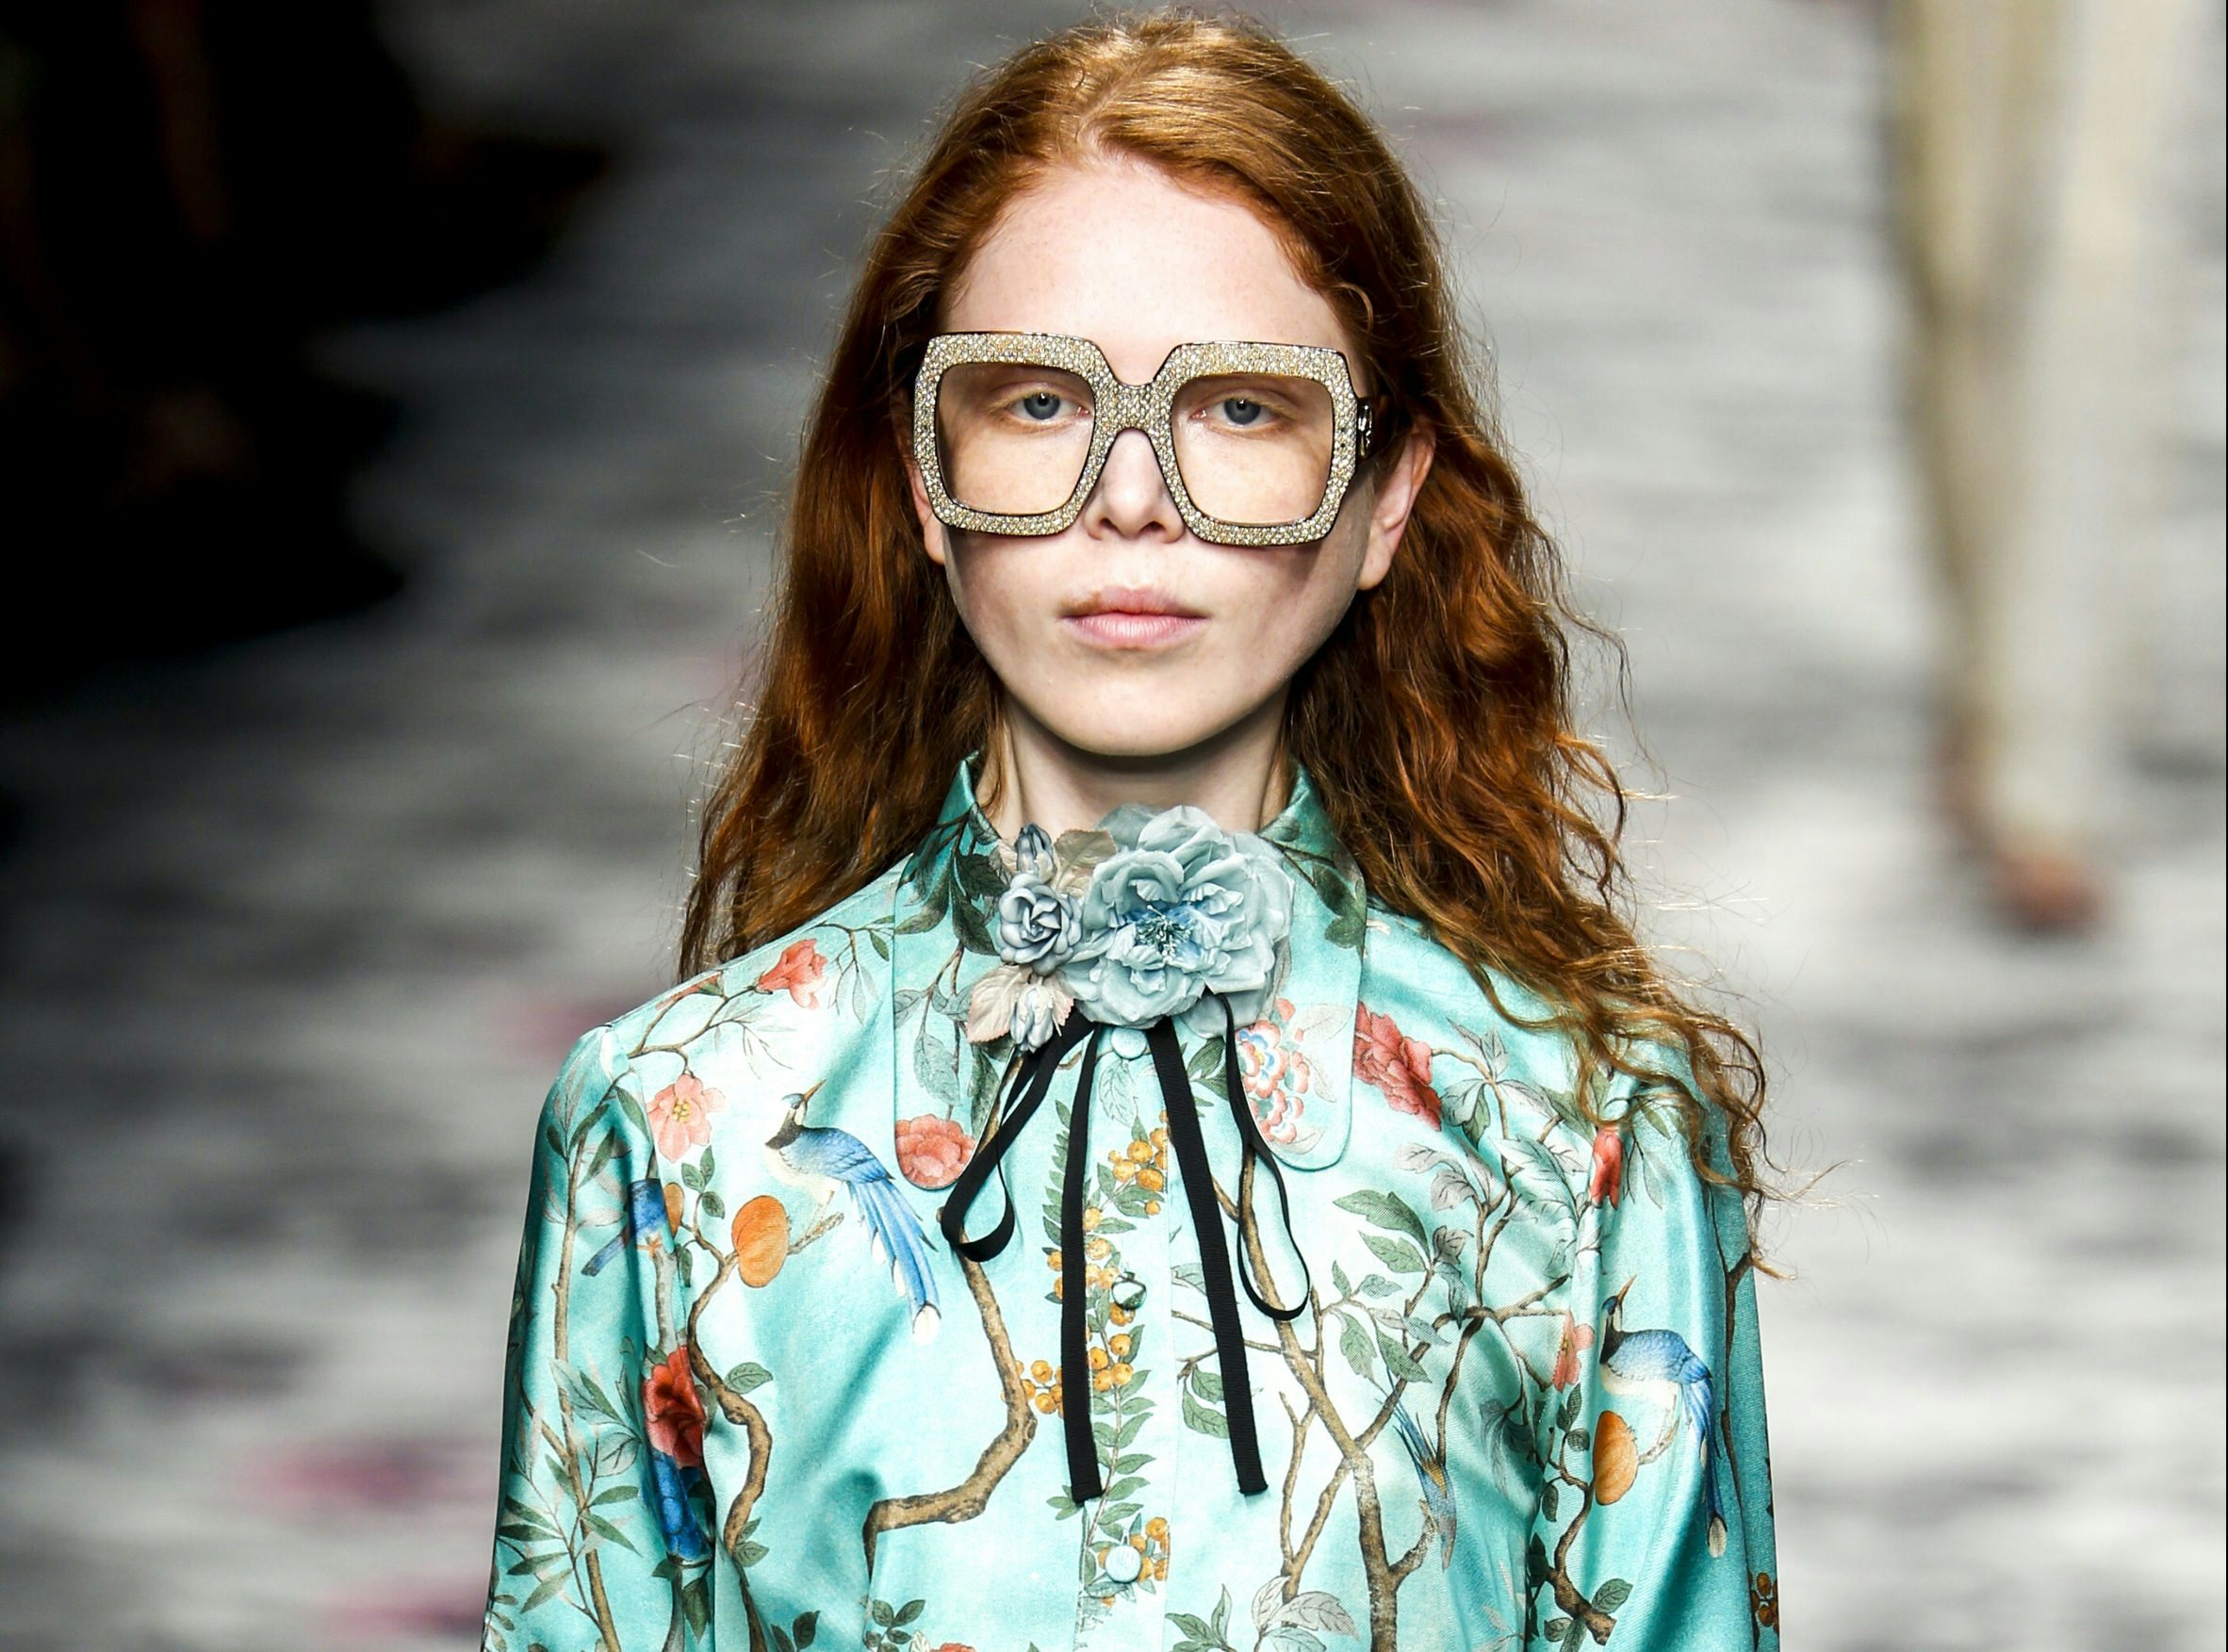 Gucci Spring Summer 2016 collection fashion show in Milan. Image via Shutterstock.